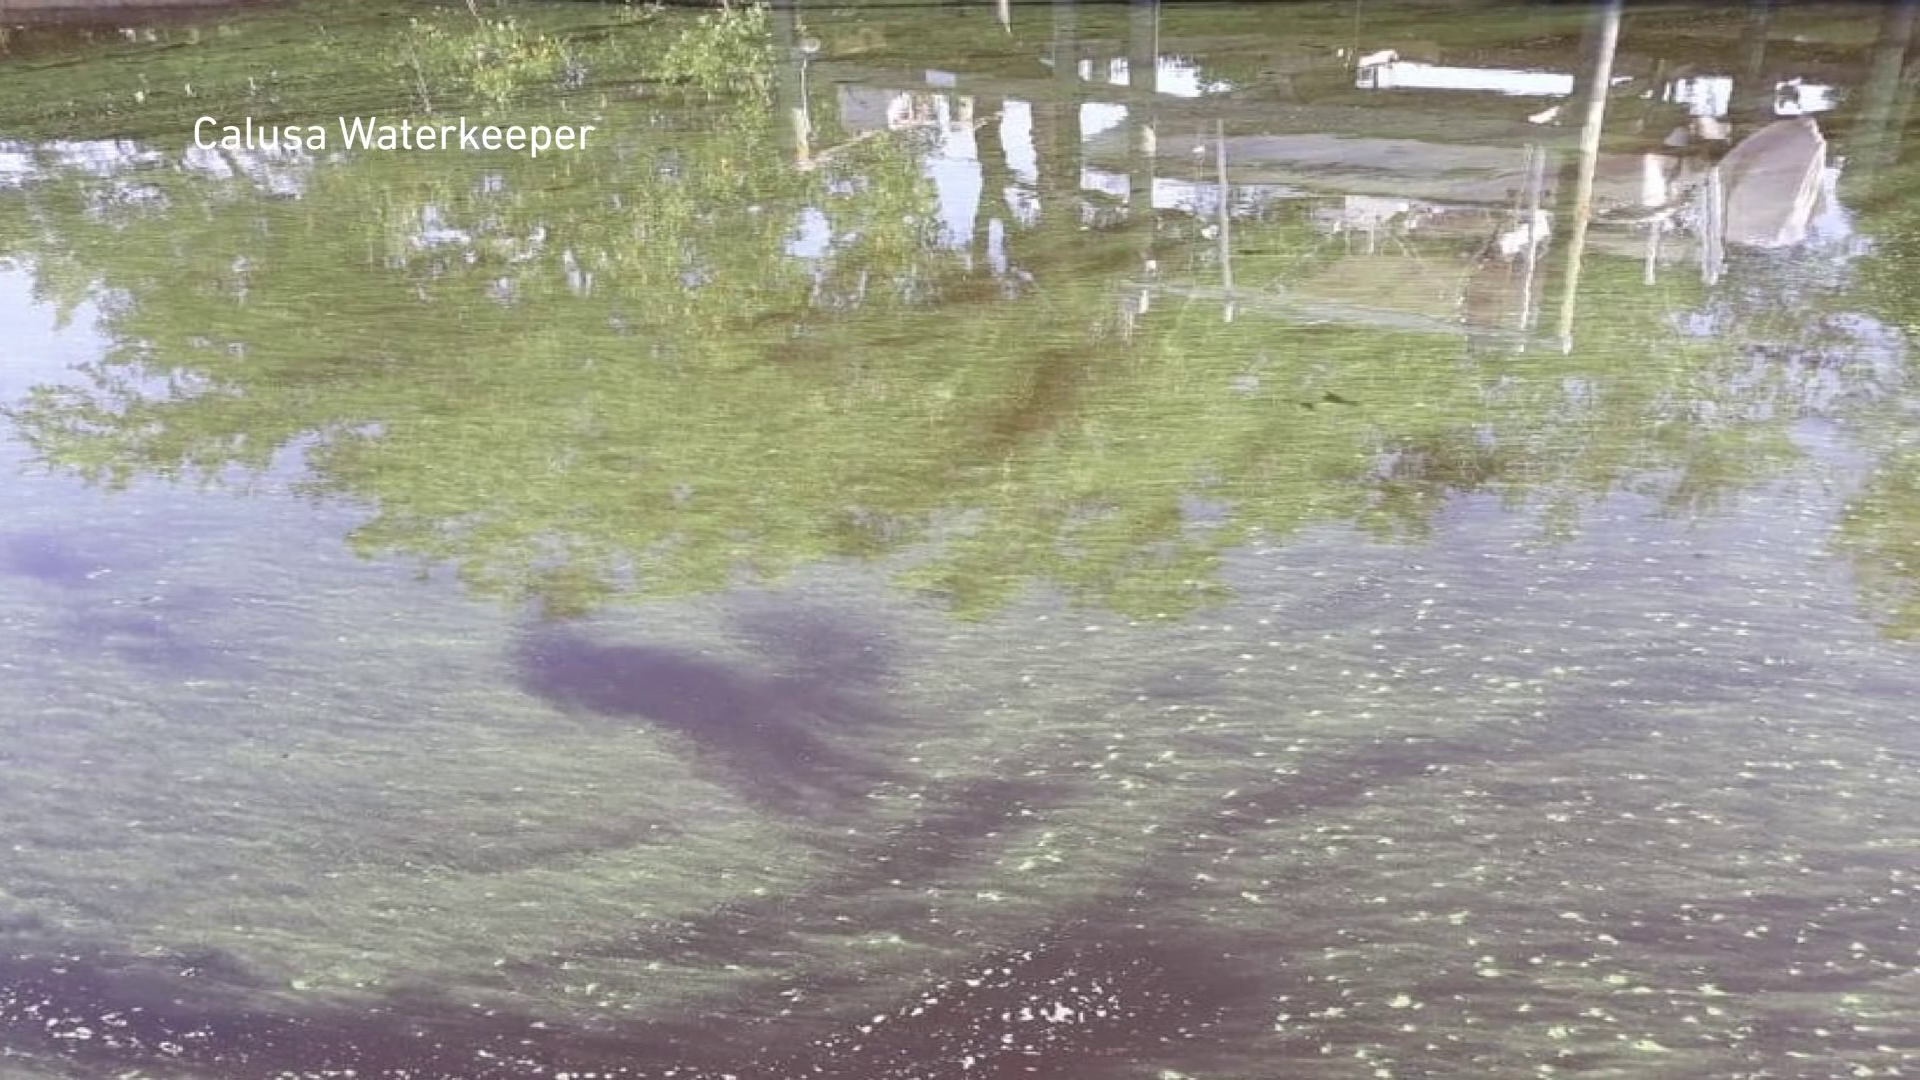 Health warning issued due to blue-green algae presence in Alva canal